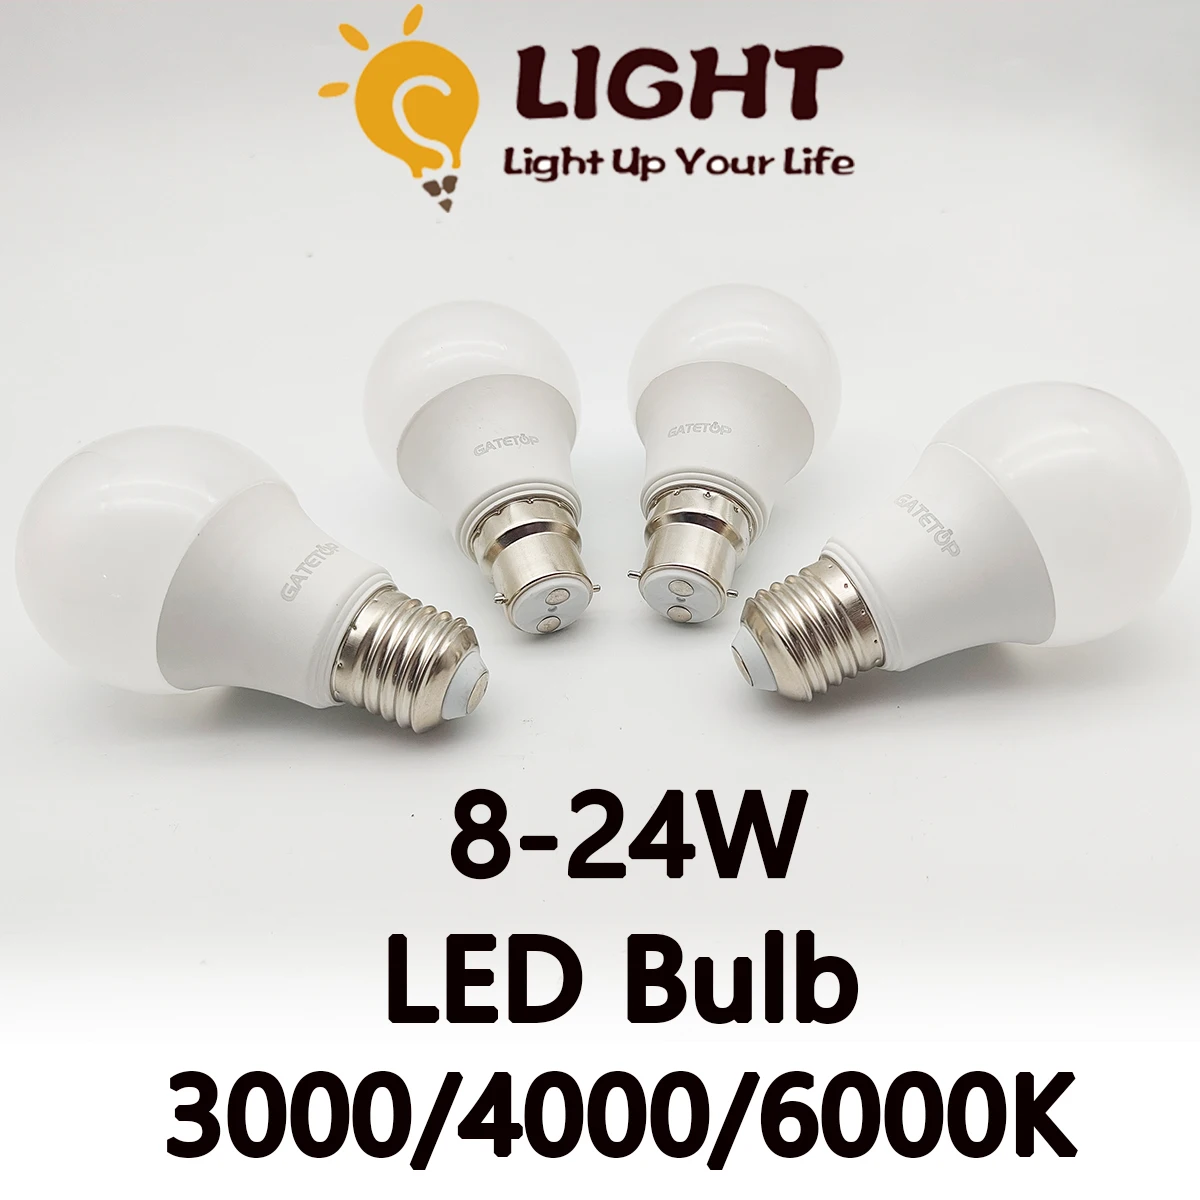 

LED Bulb 220V B22 E27 High Lumen 4/8/12/16/20PCS Without Flicker 3000K/4000K/6000K Light for Home and Other Occasions